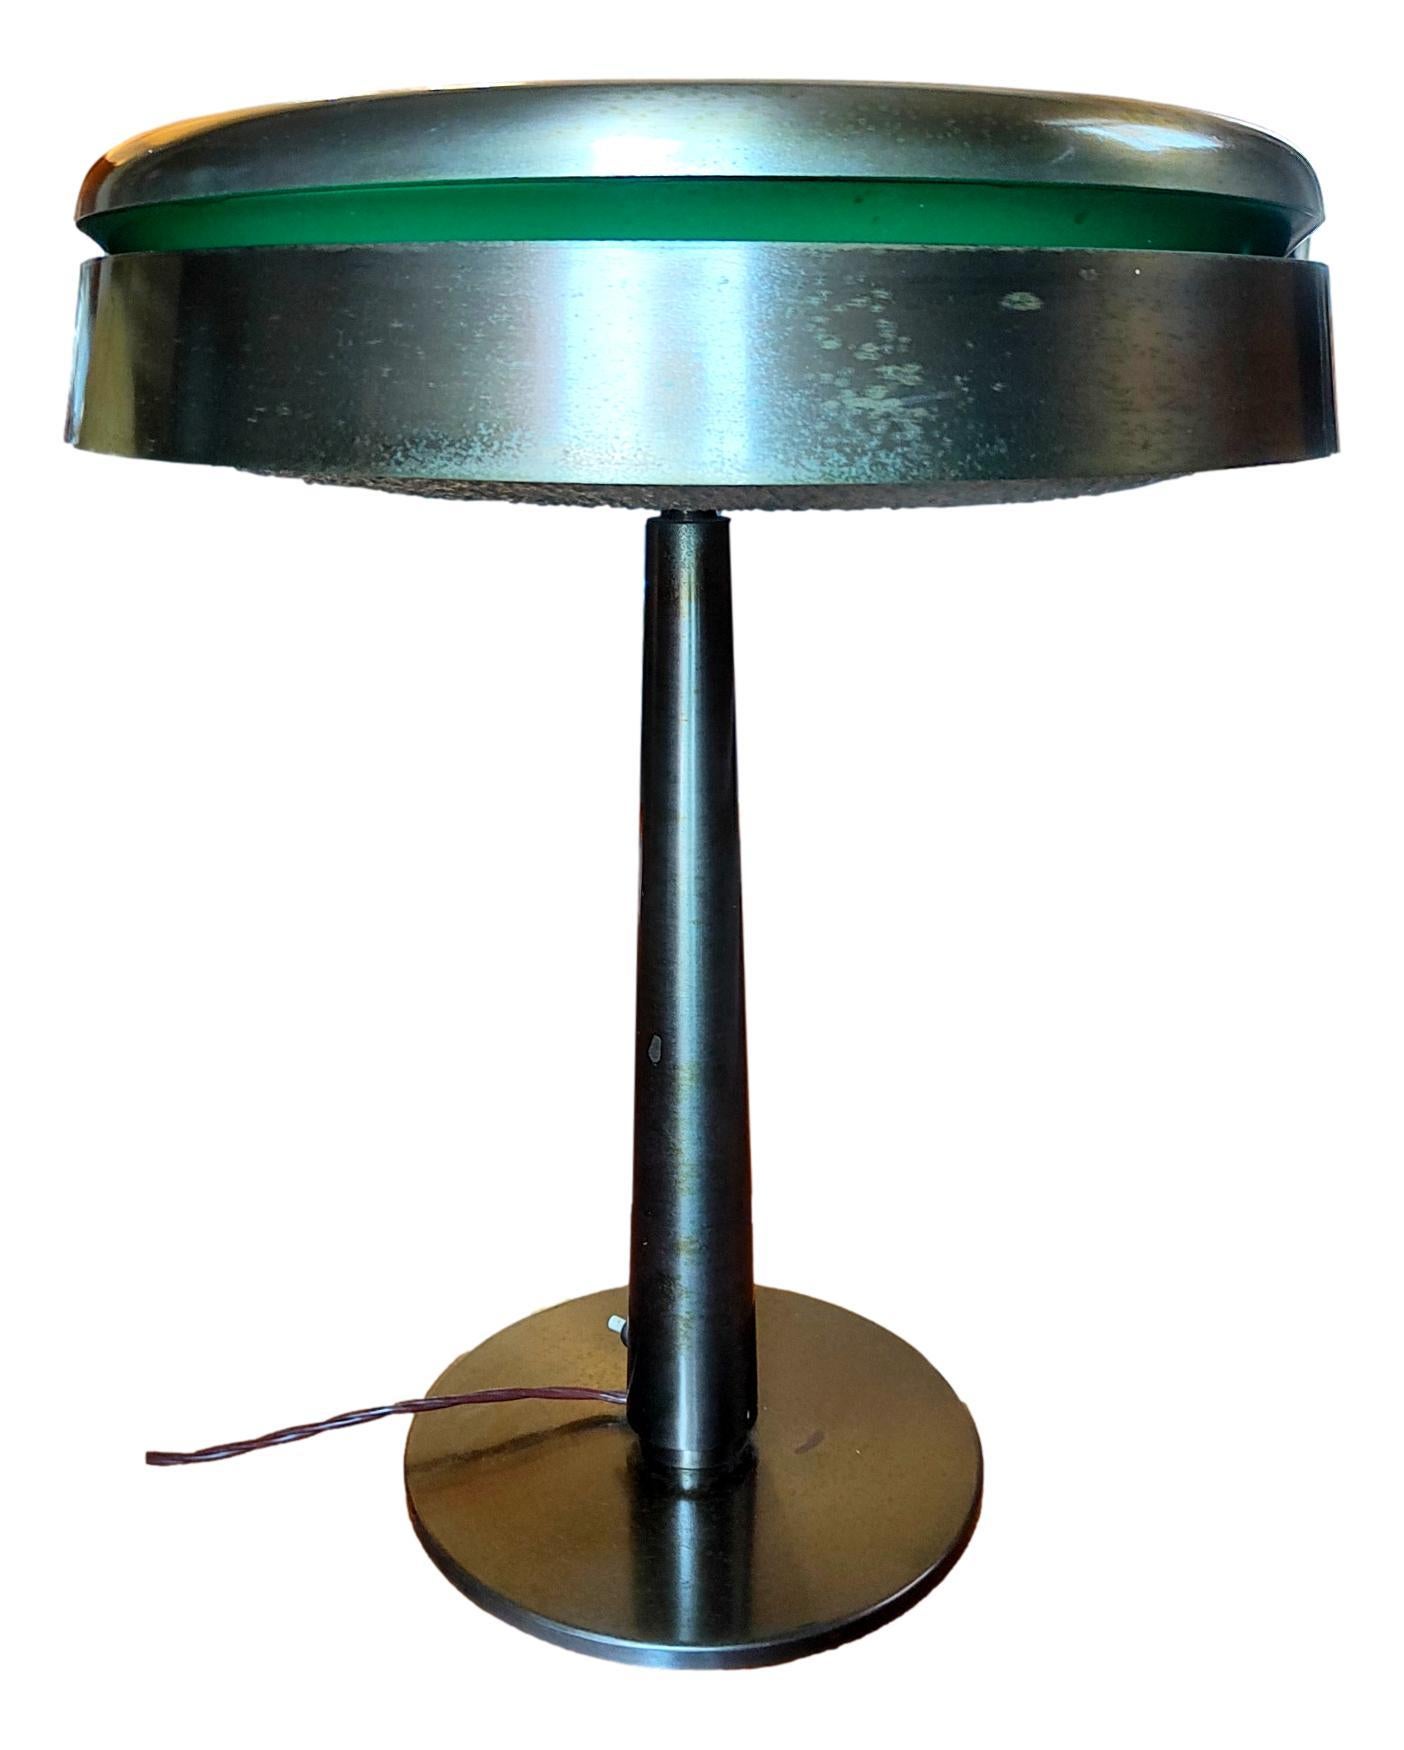 Rare 2278 table lamp model, designed by Max Ingrand for Fontana Arte, Italy, 1960
Made in brass with a glass shade, made so that the light passes both downwards and through five slits placed frontally, which provide a green color light.
The brass